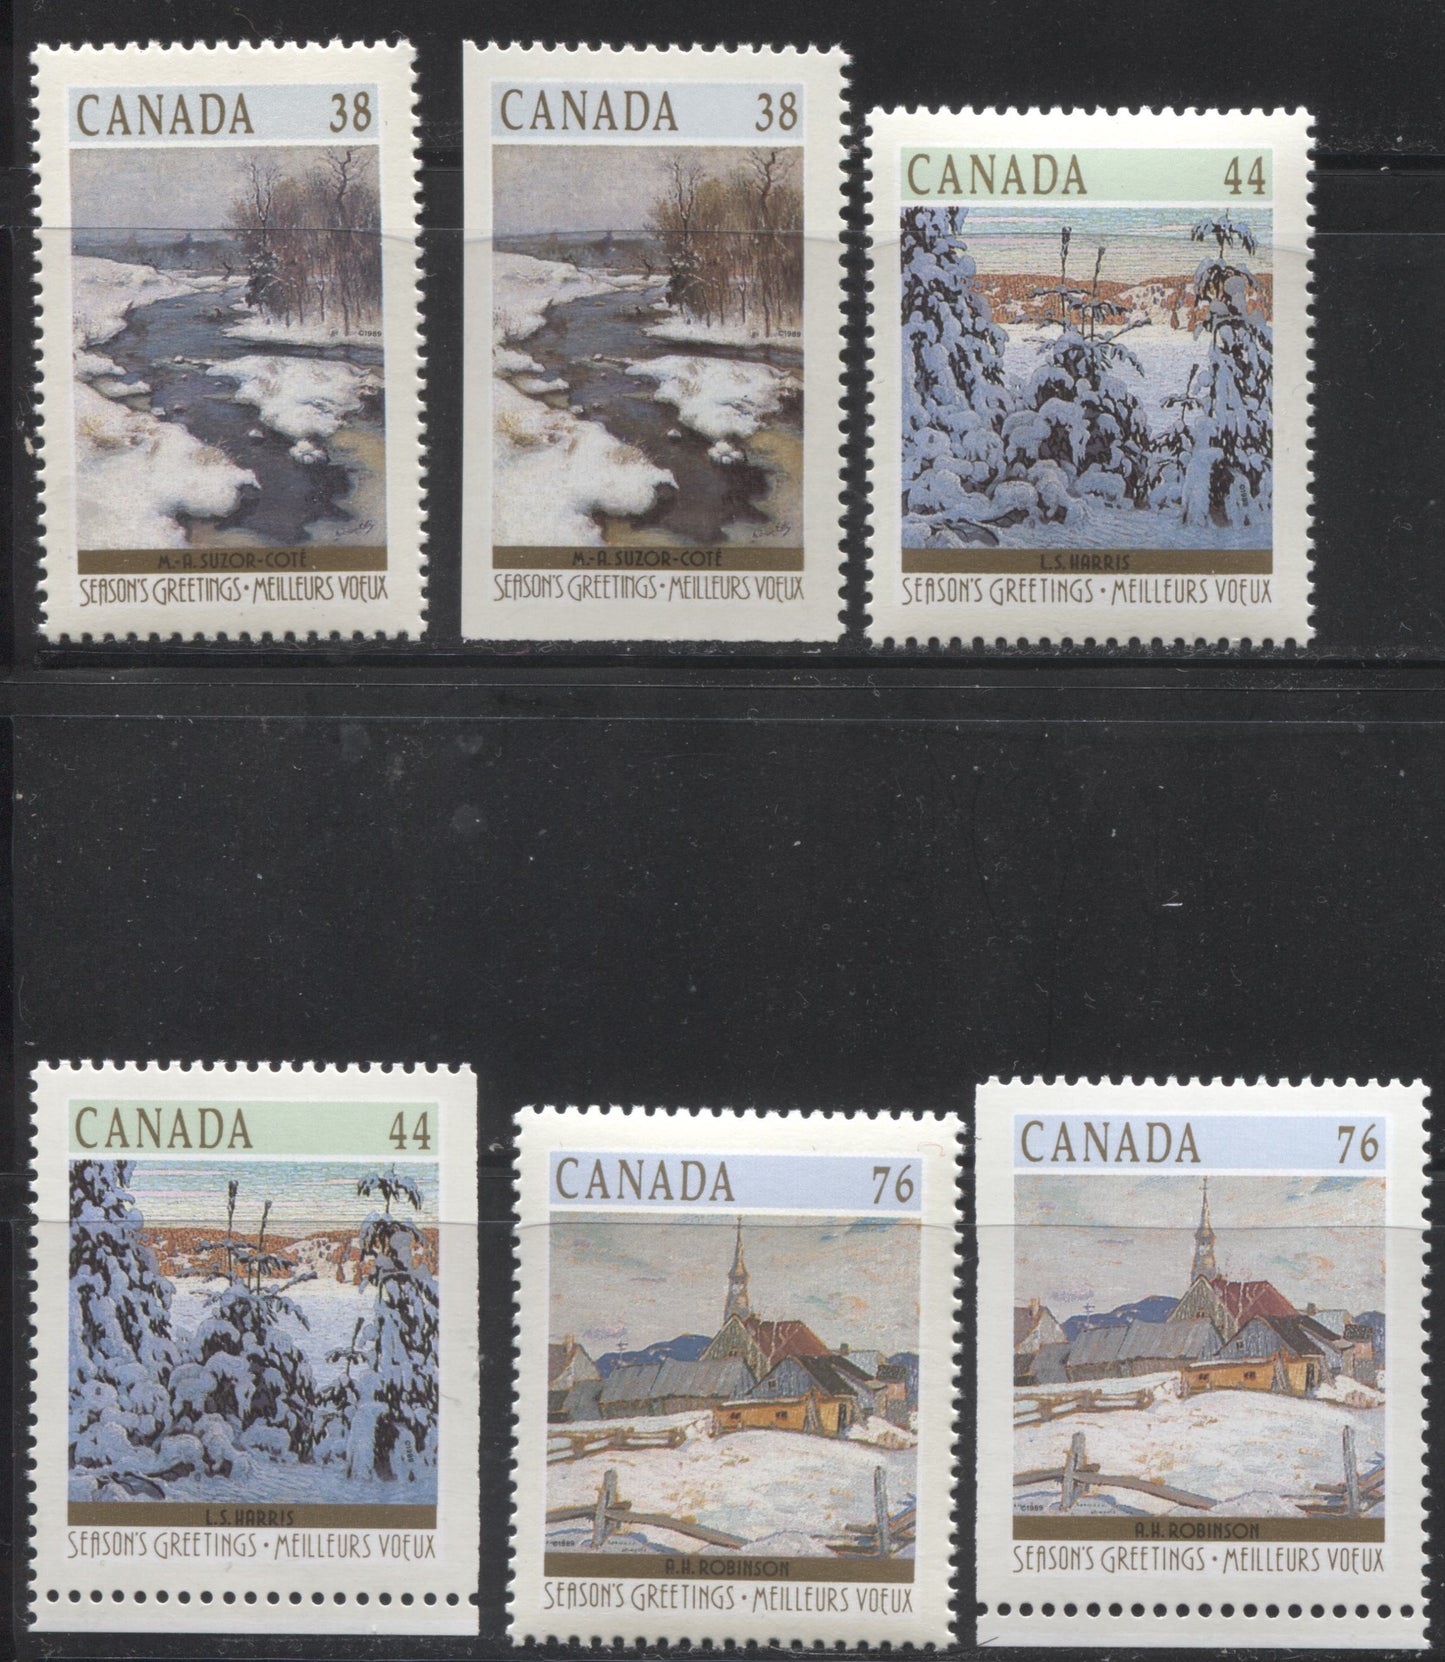 Lot 212 Canada #1256-1259 1989 Christmas Issue -  VFNH Complete Sets, Including the Booklet Stamps